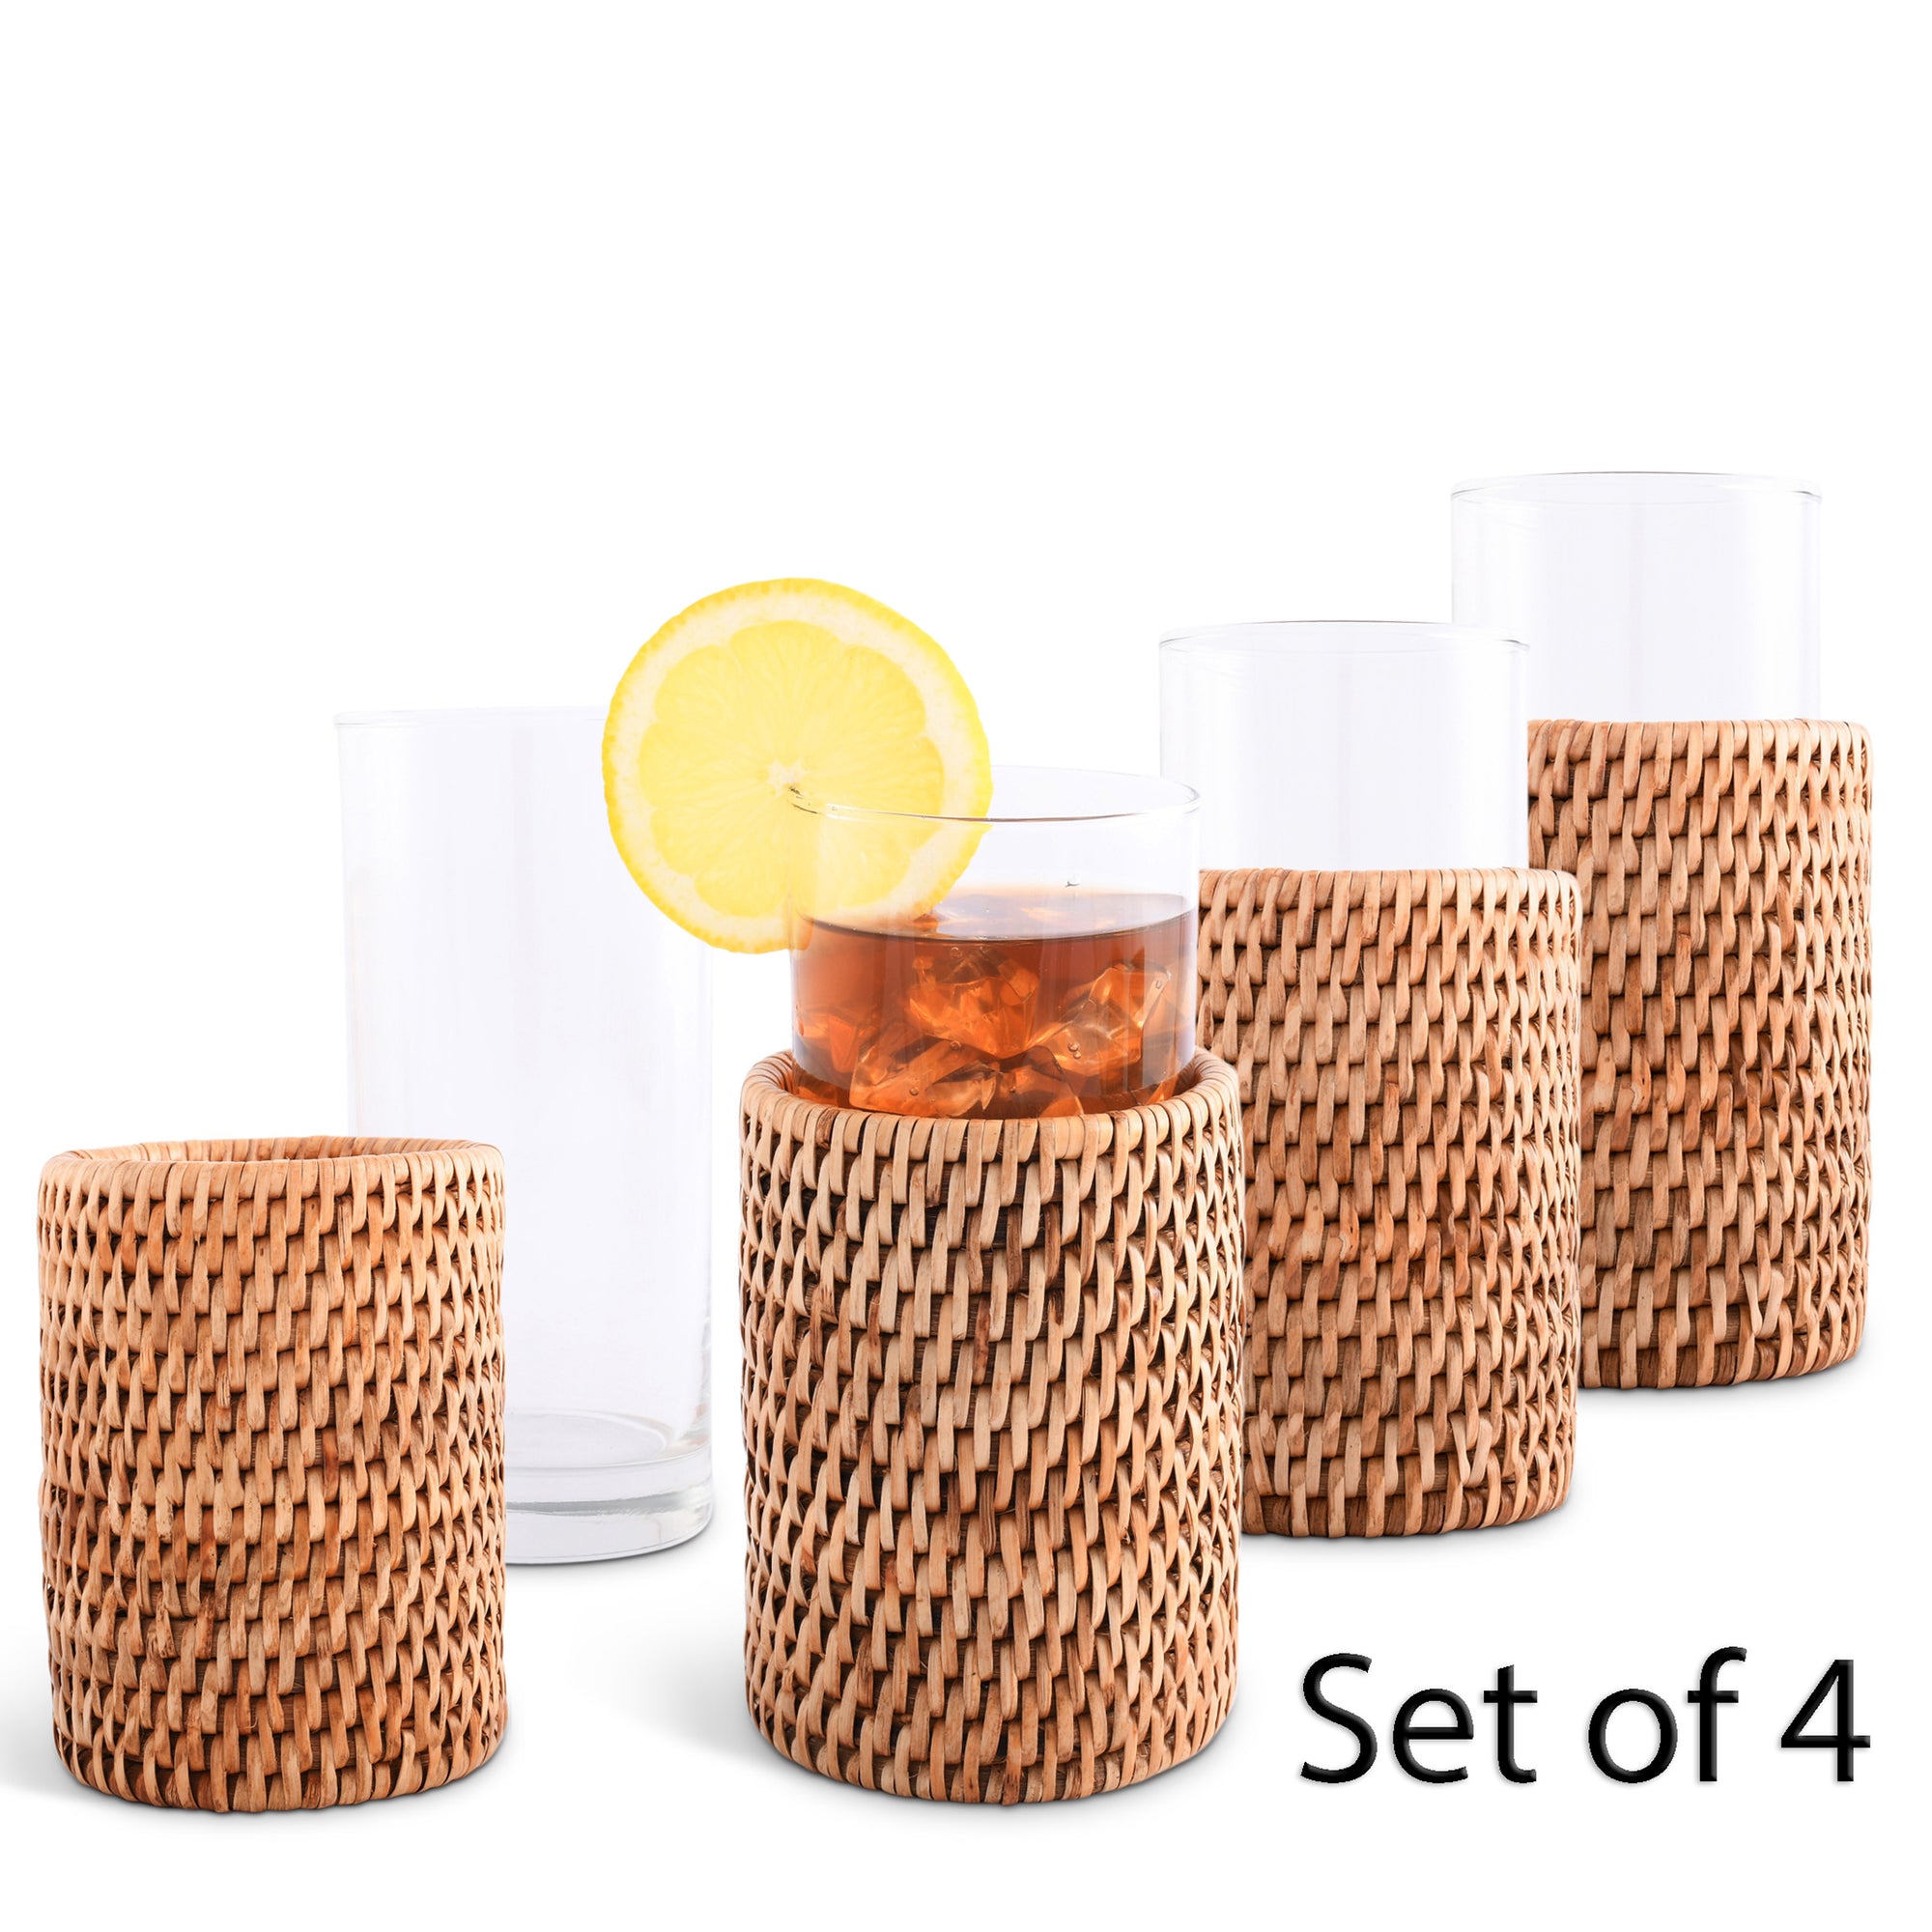 Vagabond House Drinking Glass Covered with Hand Woven Wicker Rattan - Set of 4 Product Image